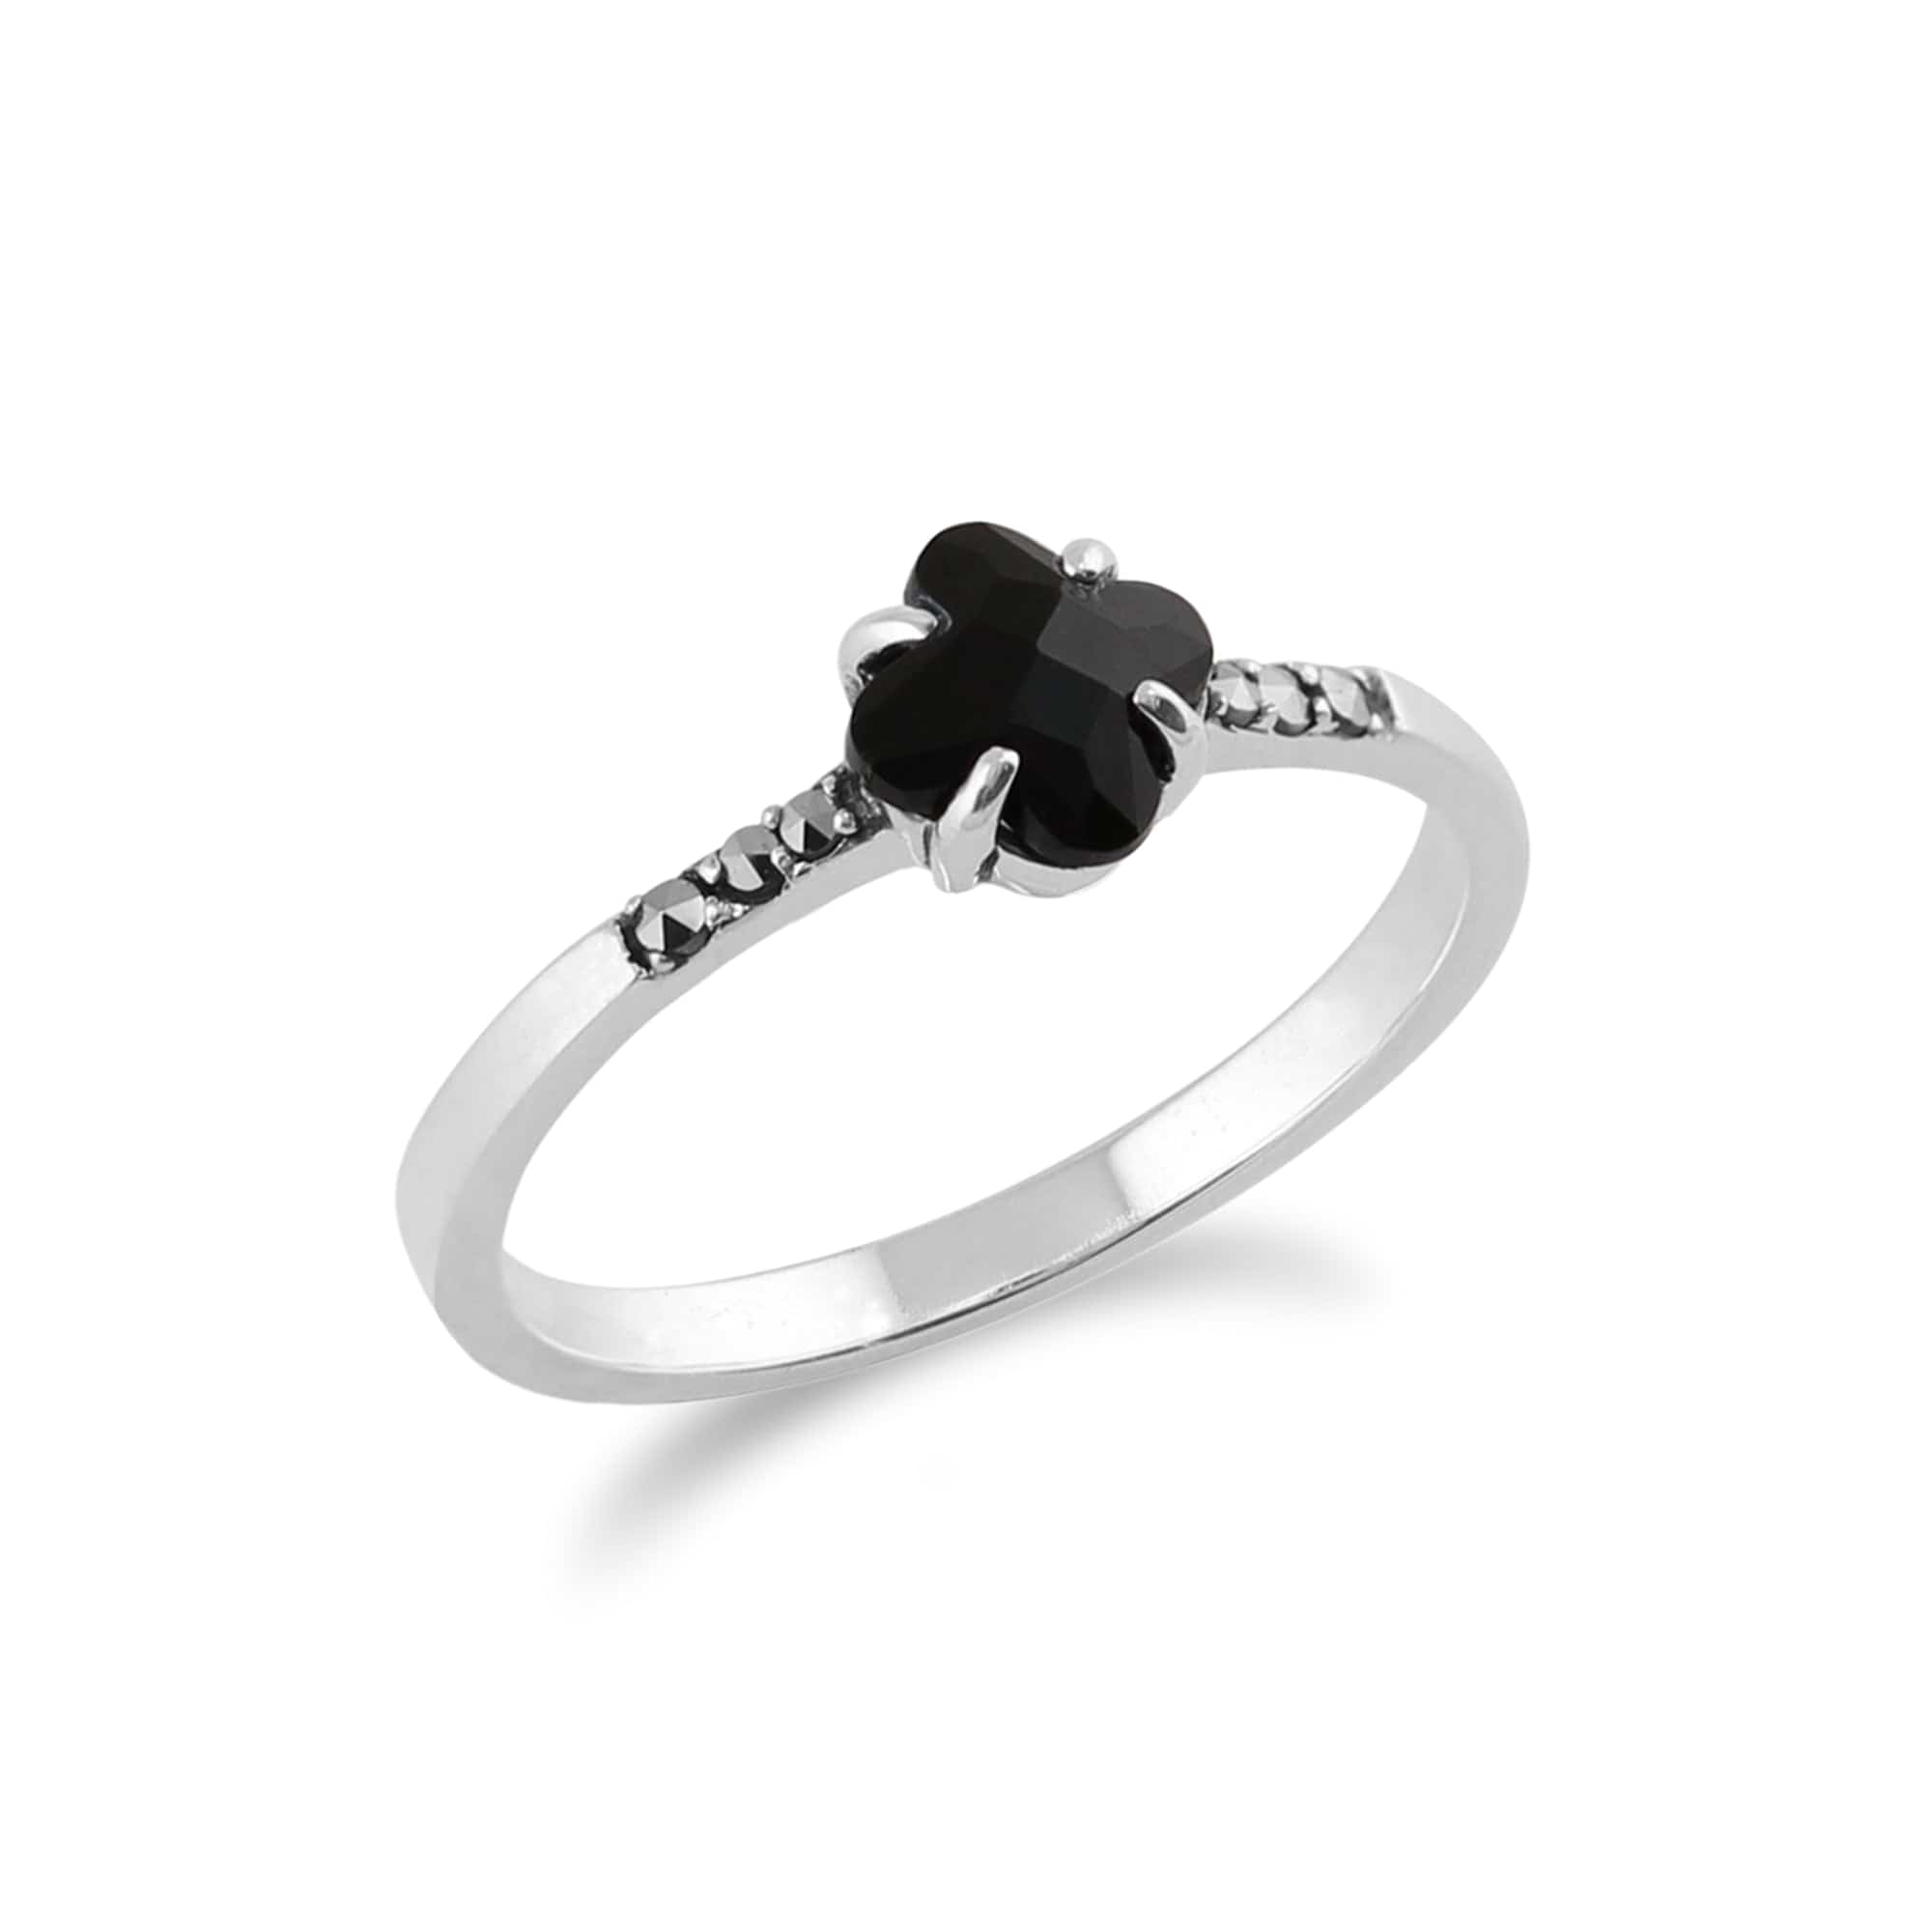 Floral Square Black Onyx & Marcasite Ring in 925 Sterling Silver - Gemondo